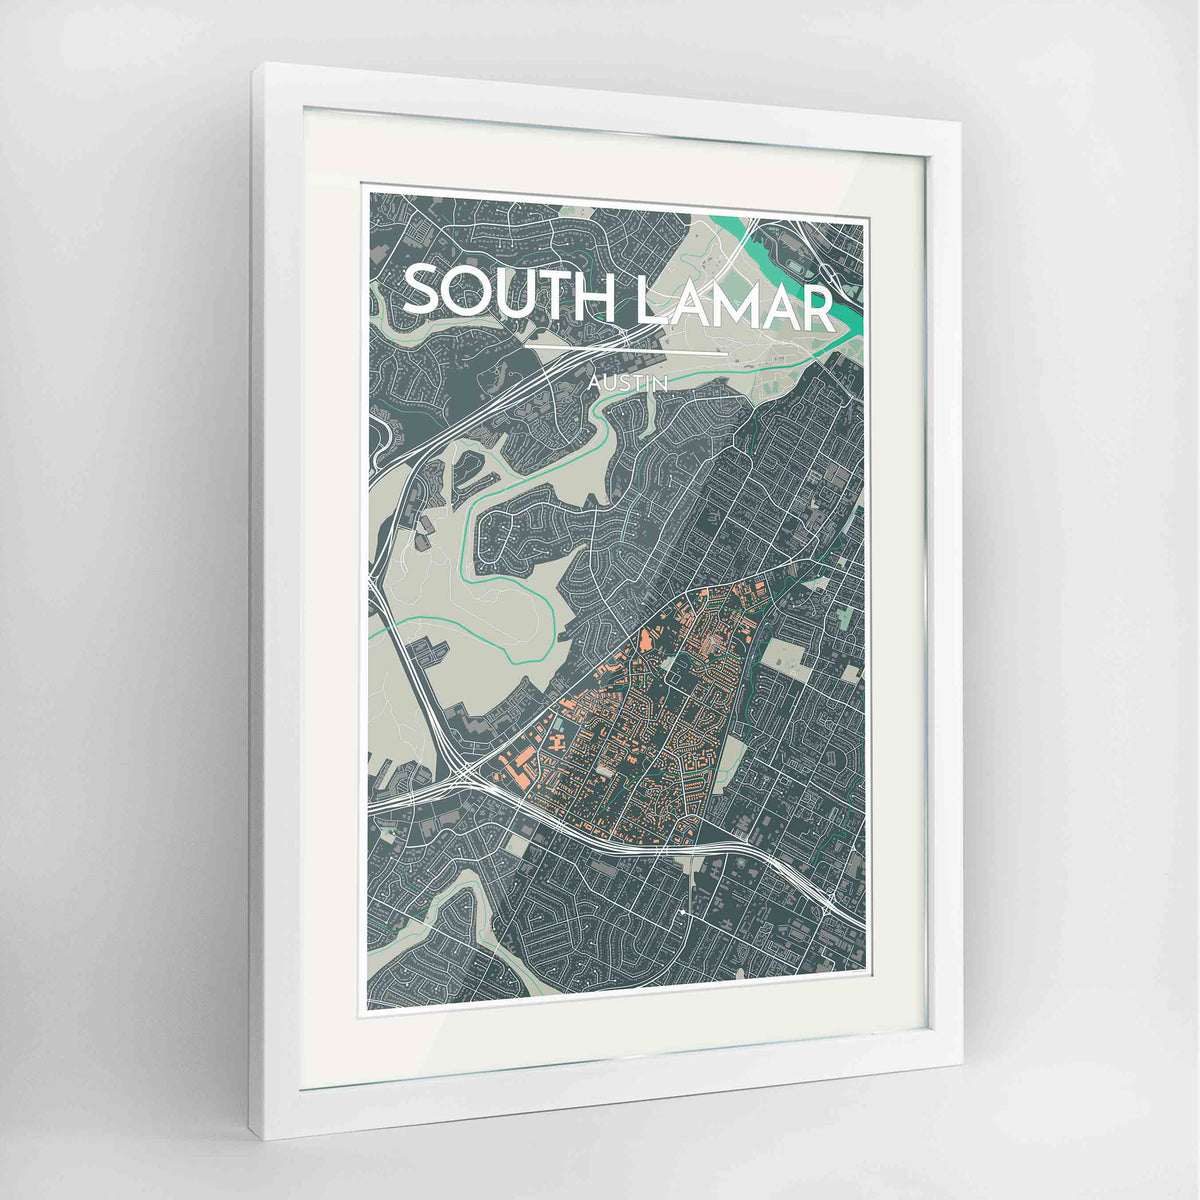 Framed South Lamar Neighbourhood of Austin Map Art Print 24x36&quot; Contemporary White frame Point Two Design Group